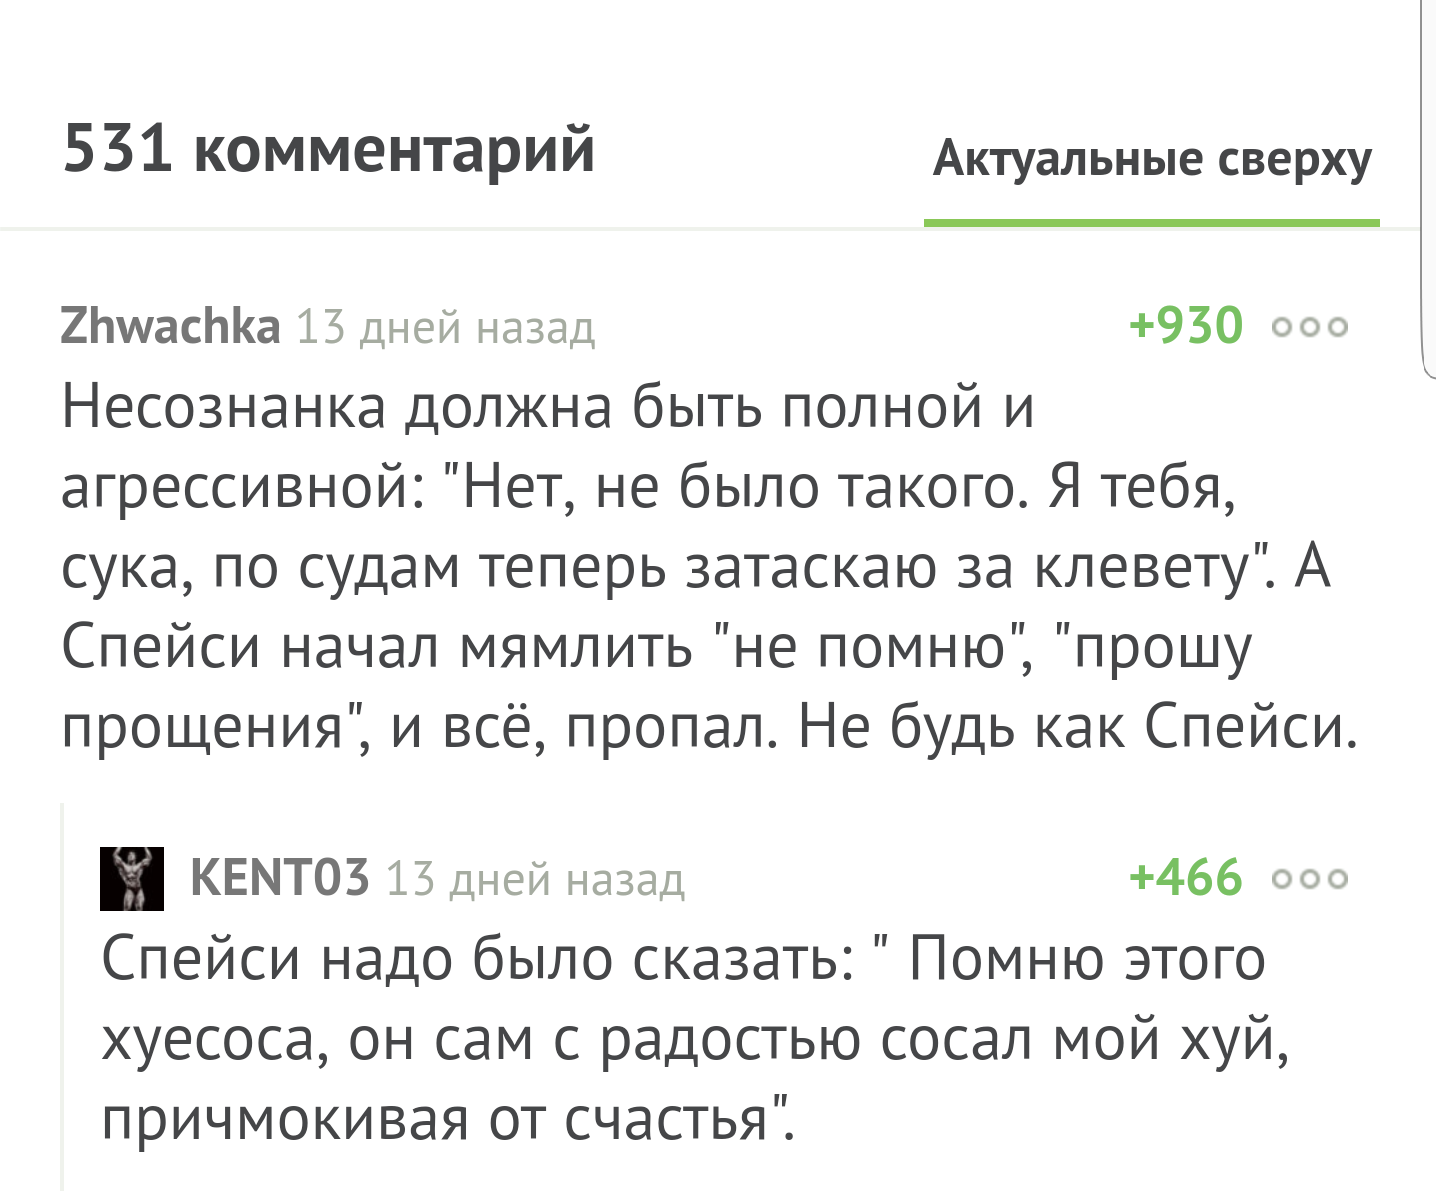 Thousand likes. Or the moral compass. - My, Kevin Spacey, Harvey Weinstein, Hollywood, Scandal, Изнасилование